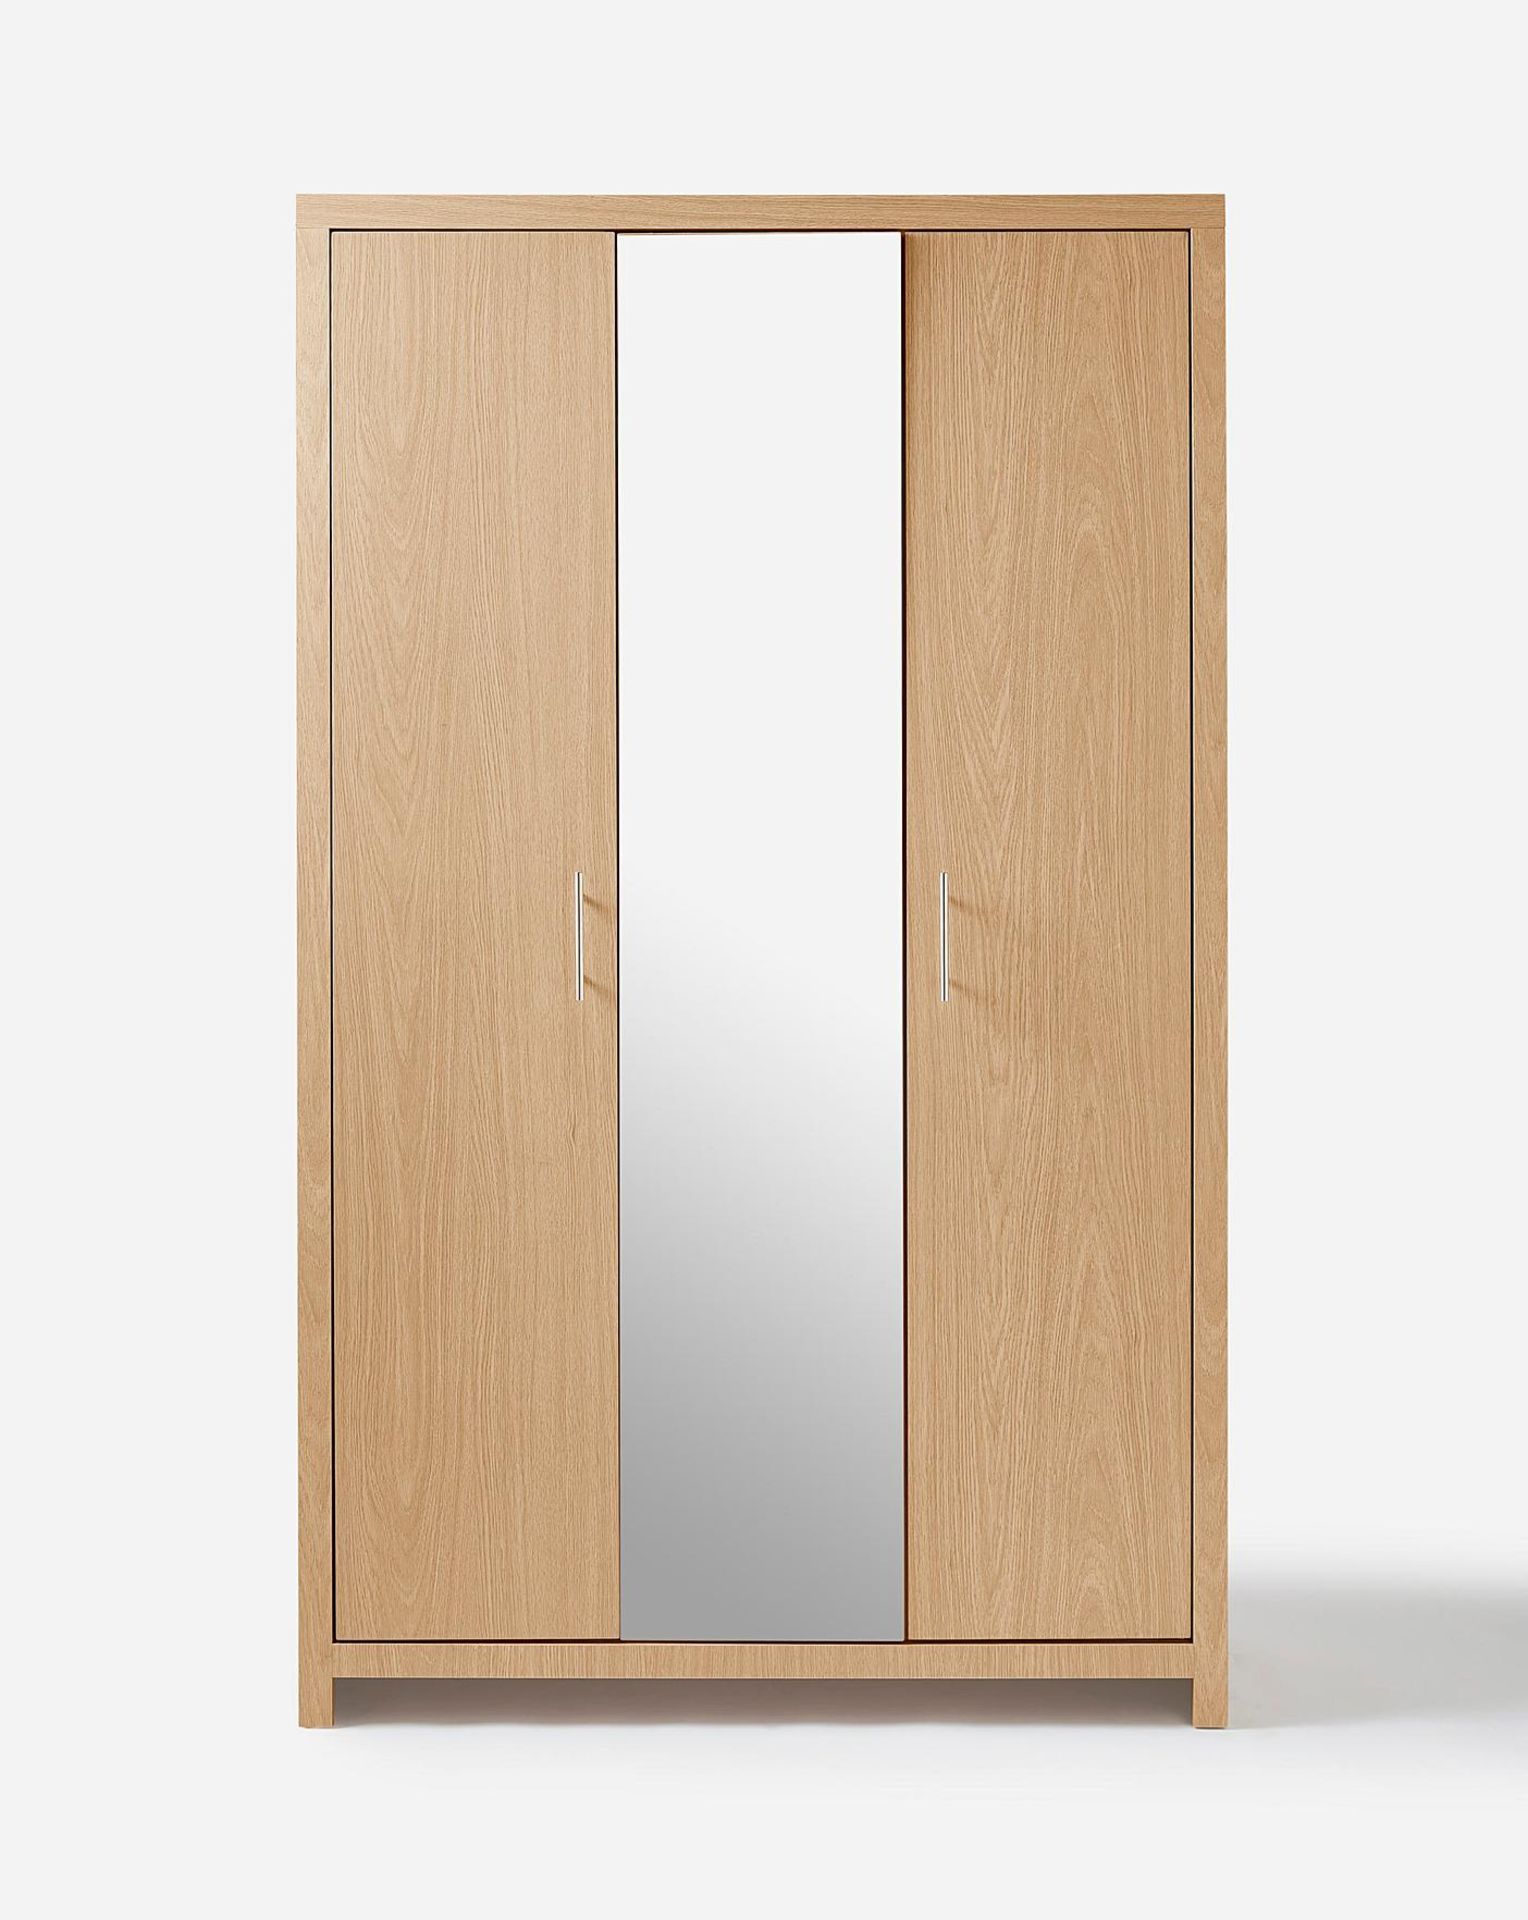 NEW & BOXED DAKOTA 3 Door Mirrored Wardrobe - OAK EFFECT. RRP £299. Part of At Home Collection, - Image 2 of 3